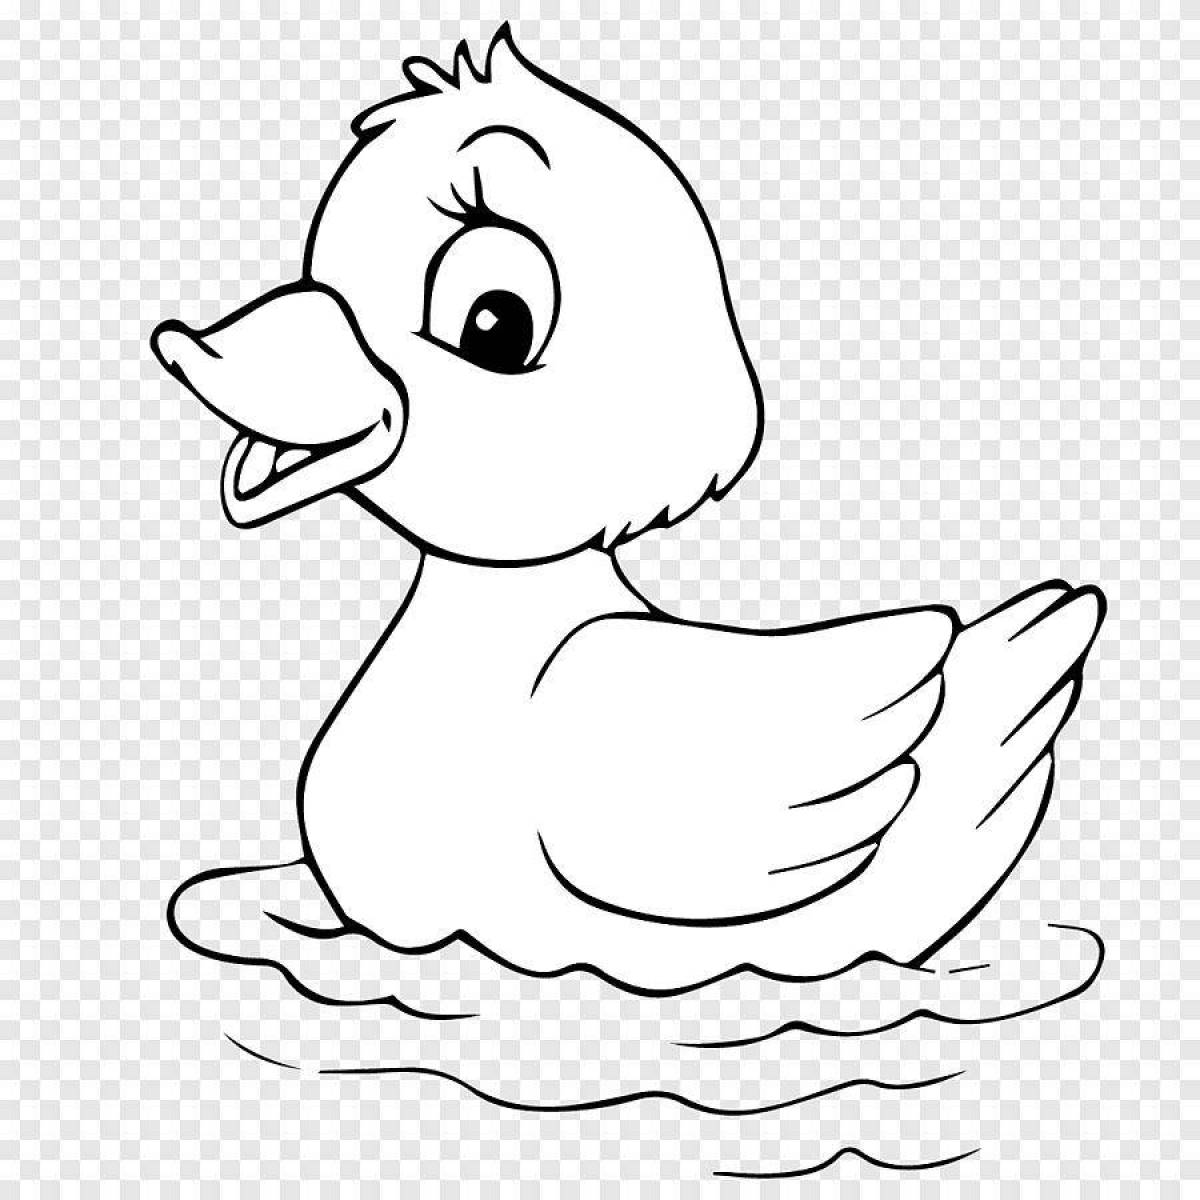 Fancy duck coloring page